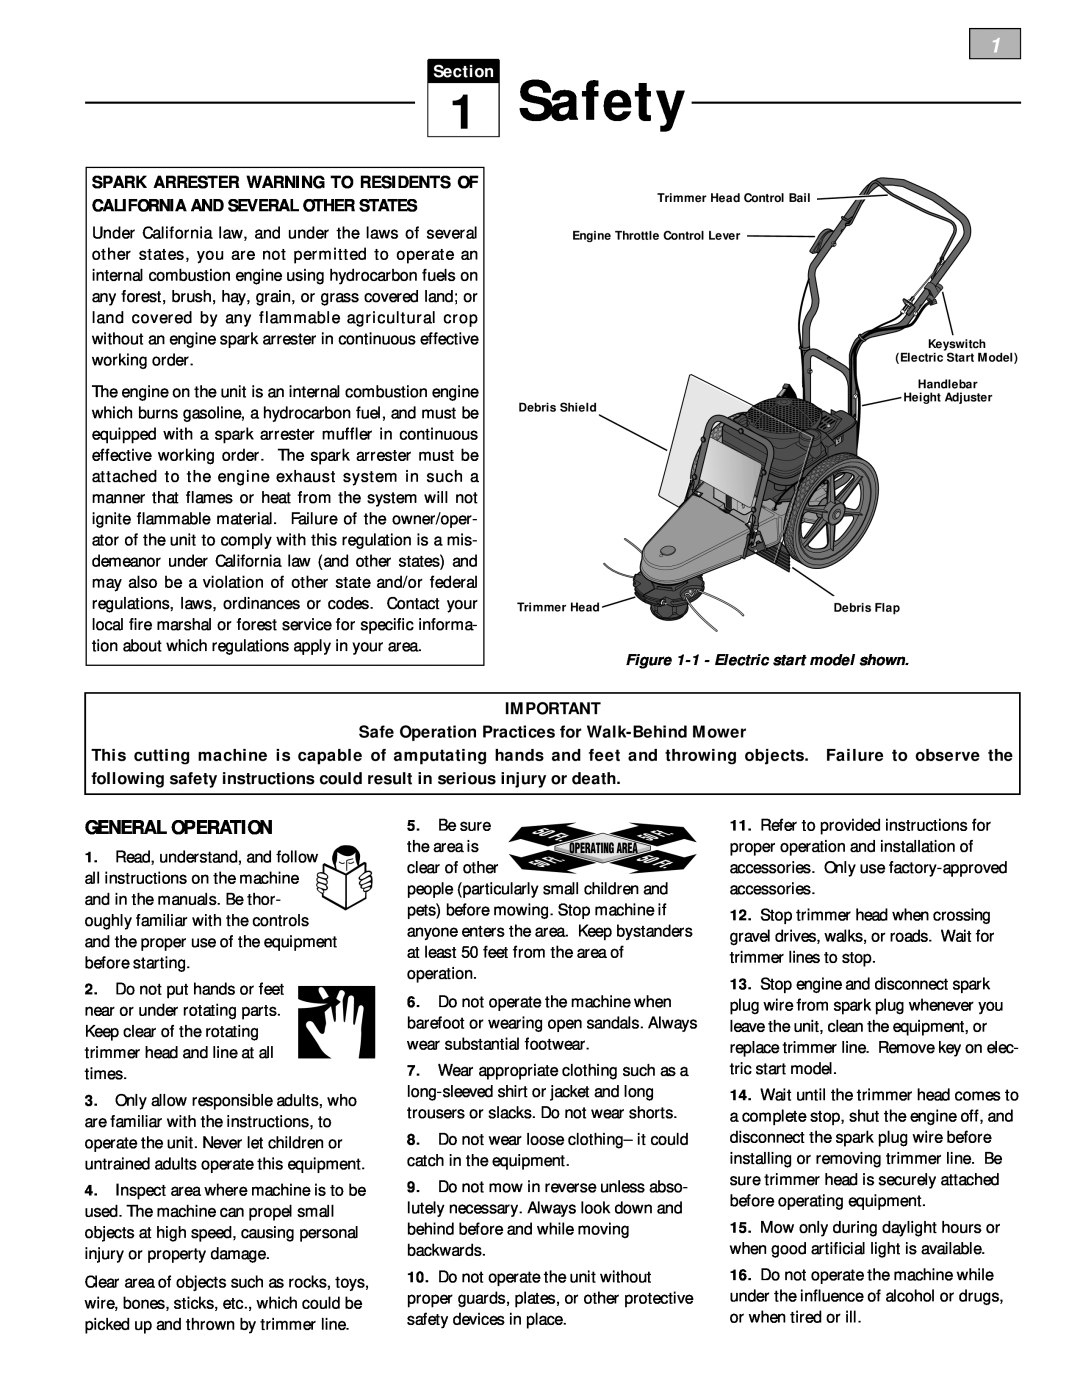 Troy-Bilt 52063, 52064 owner manual Safety, General Operation, Section, Safe Operation Practices for Walk-Behind Mower 